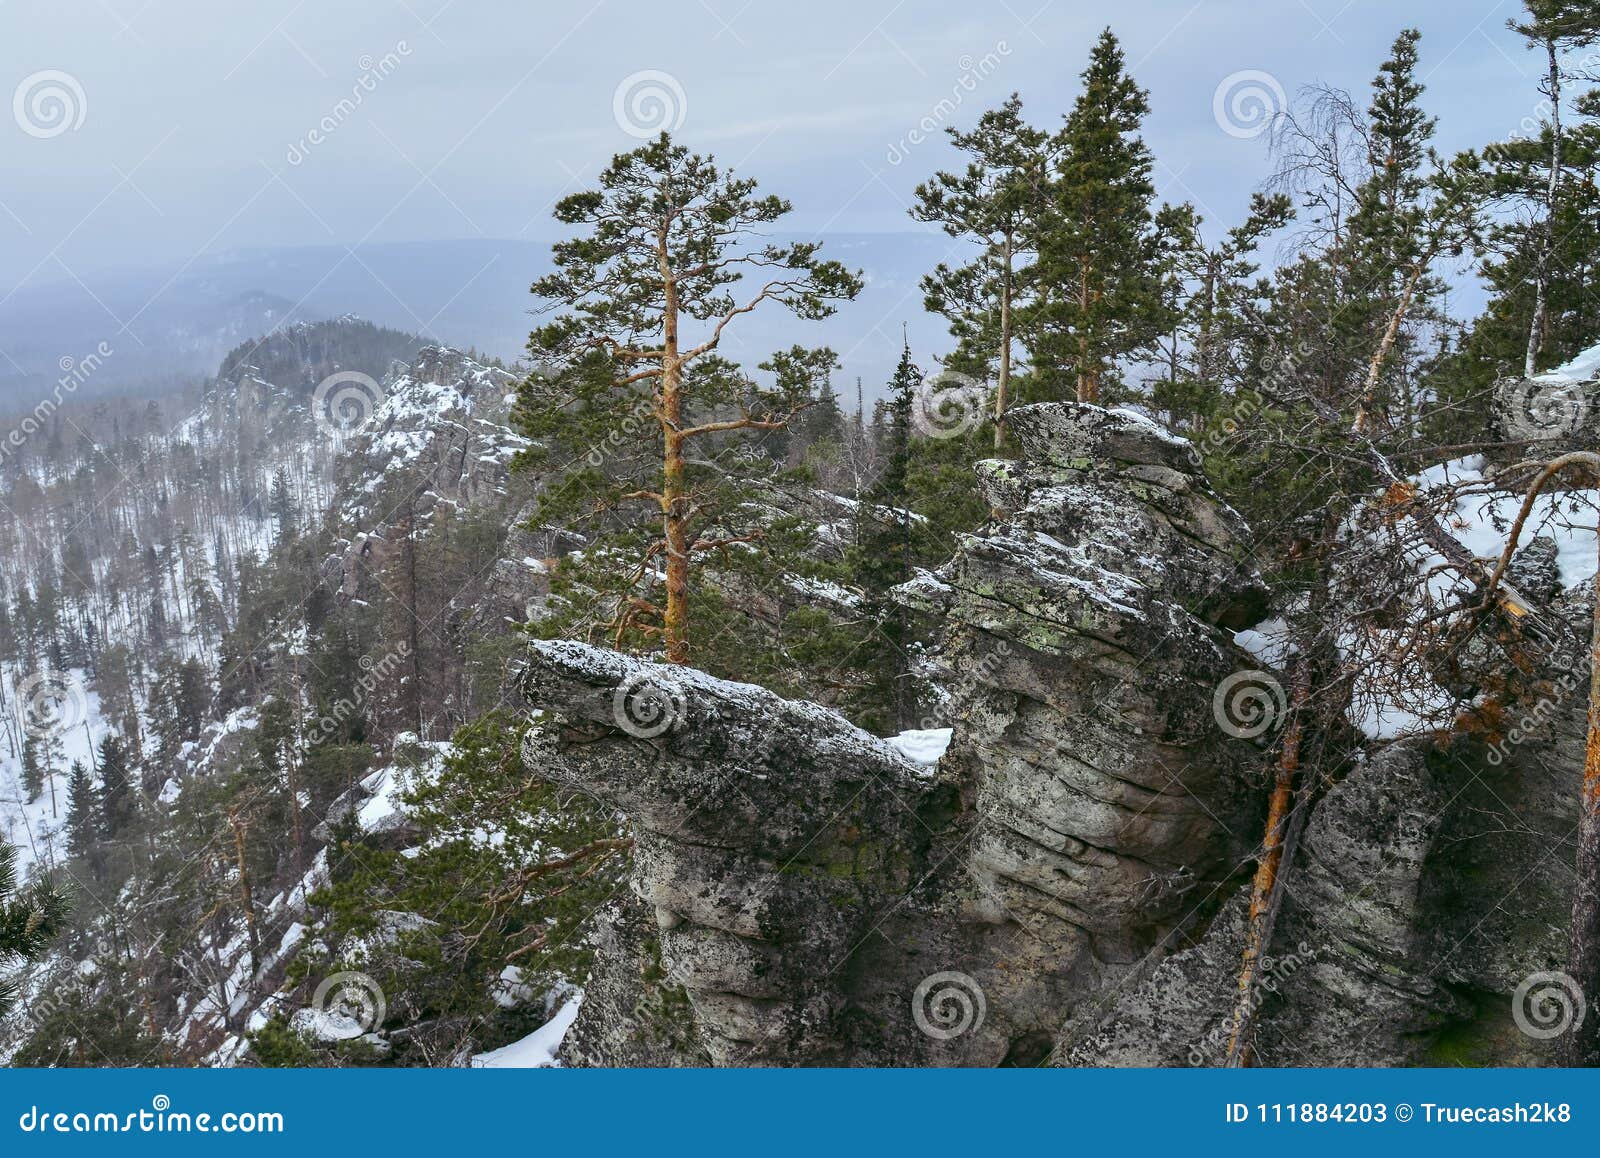 Winter Mountain Landscape Snowy Rocks And Cliffs Russia Ural Stock